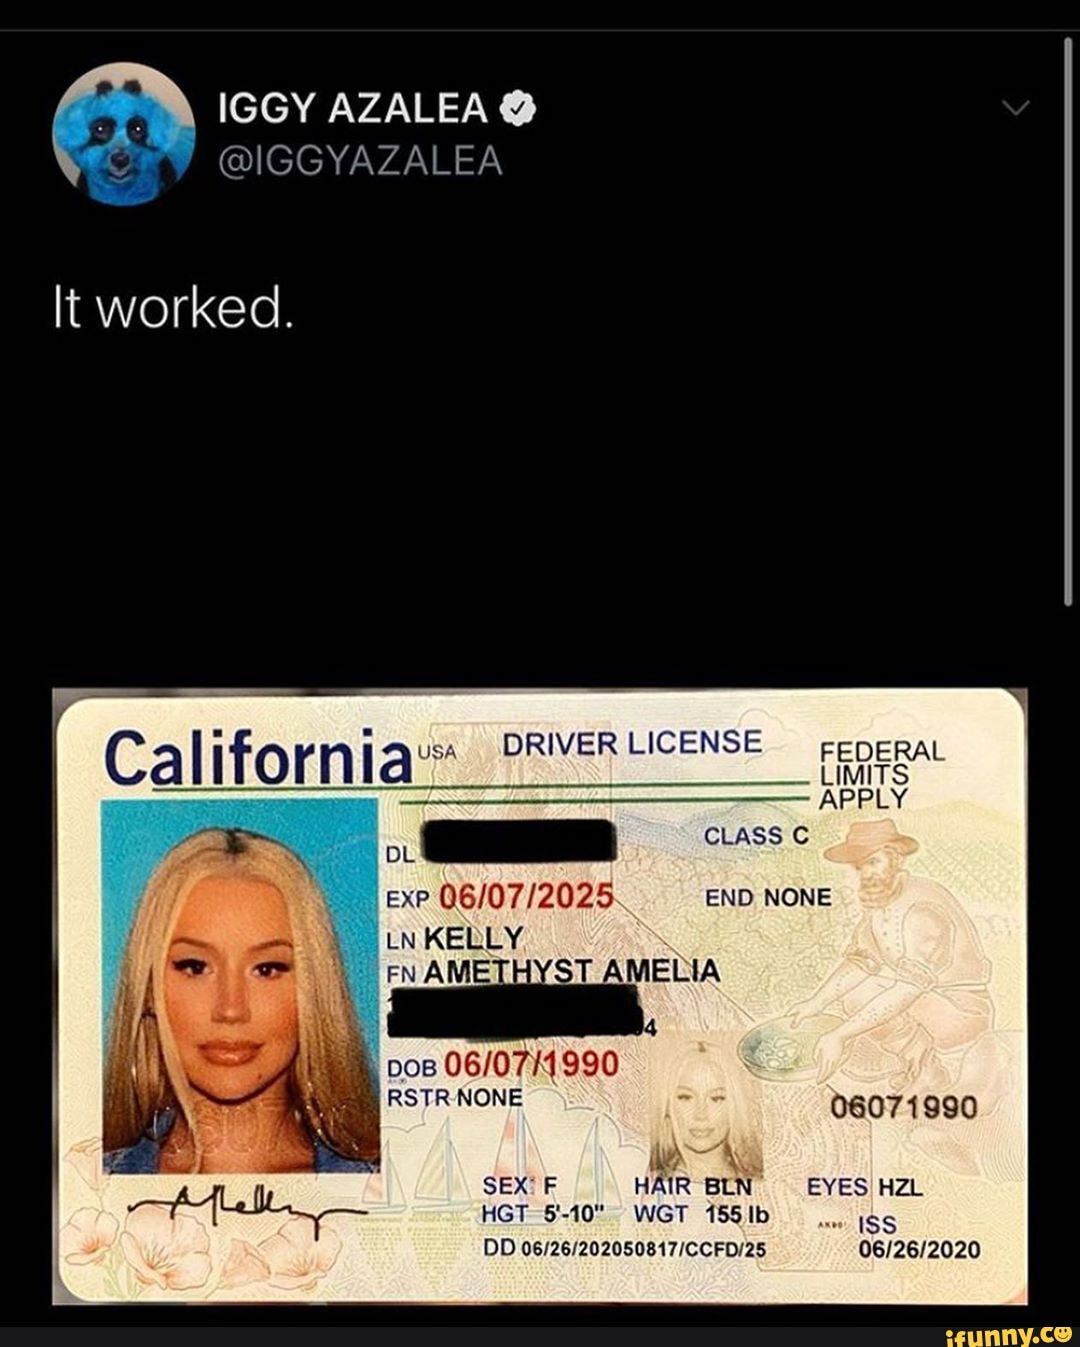 IGGY AZALEA @ VANE It worked. DRIVER LICENSE reperRaL CLASS LIMITS ...